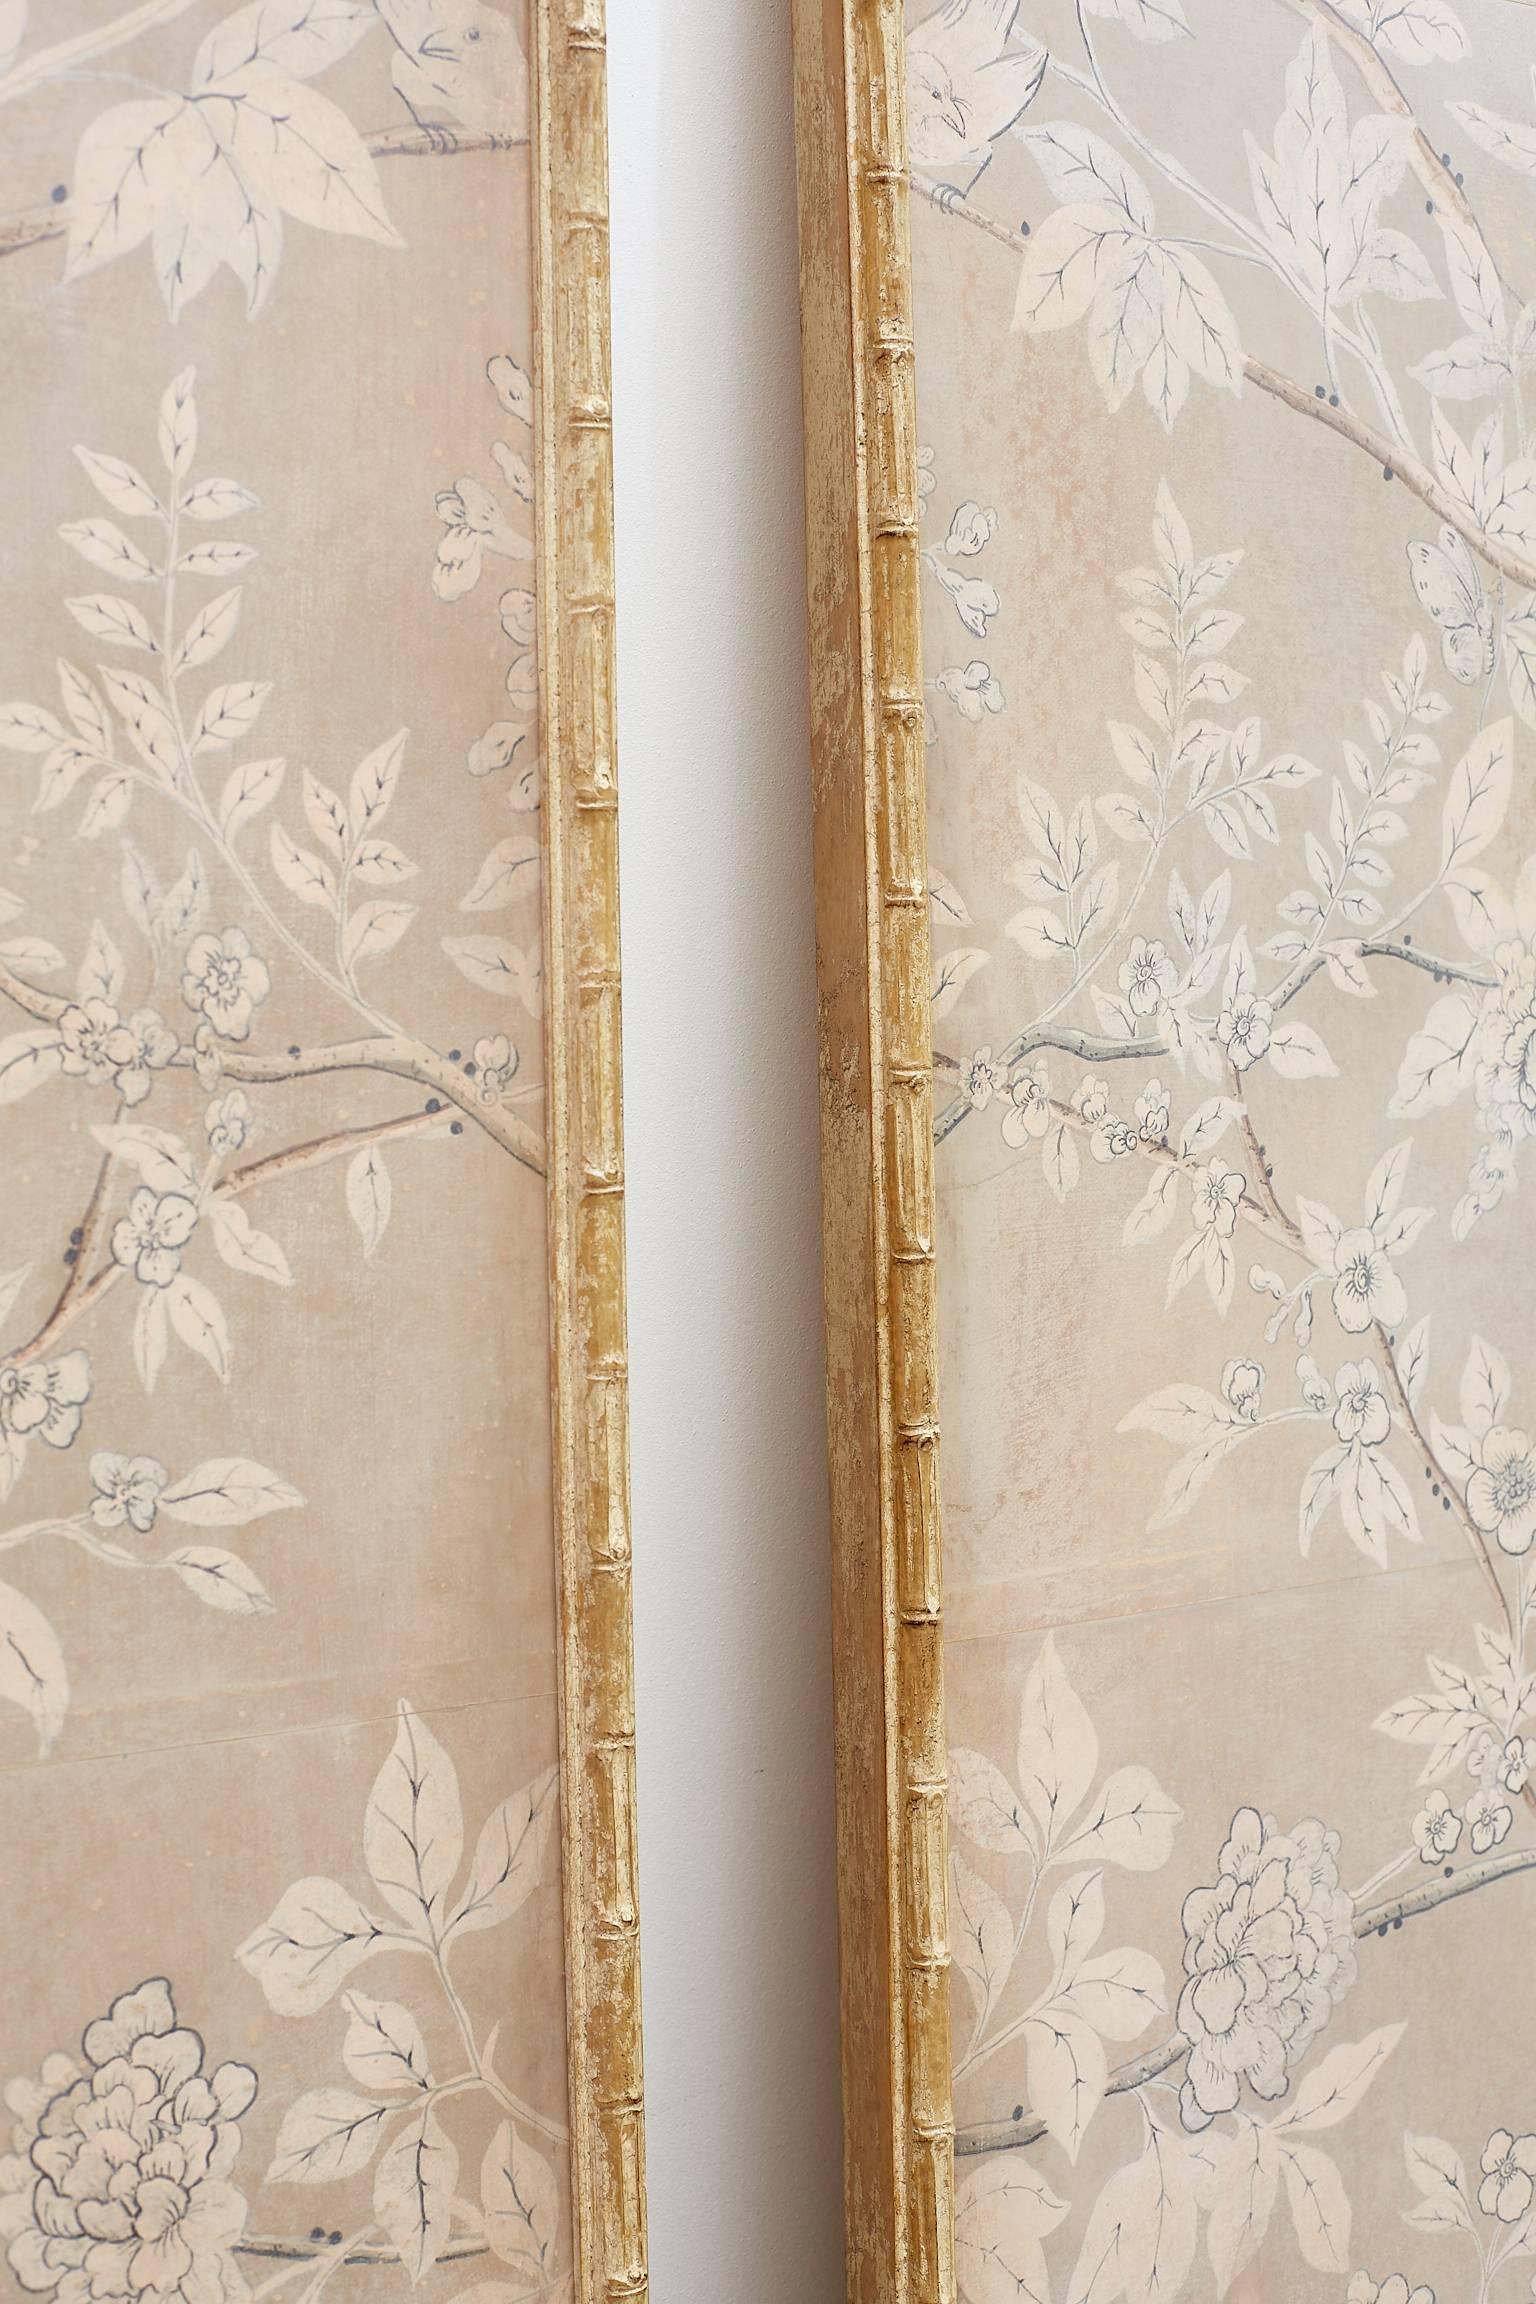 Monumental Chinoiserie Wallpaper Panels by Dennis and Leen 1